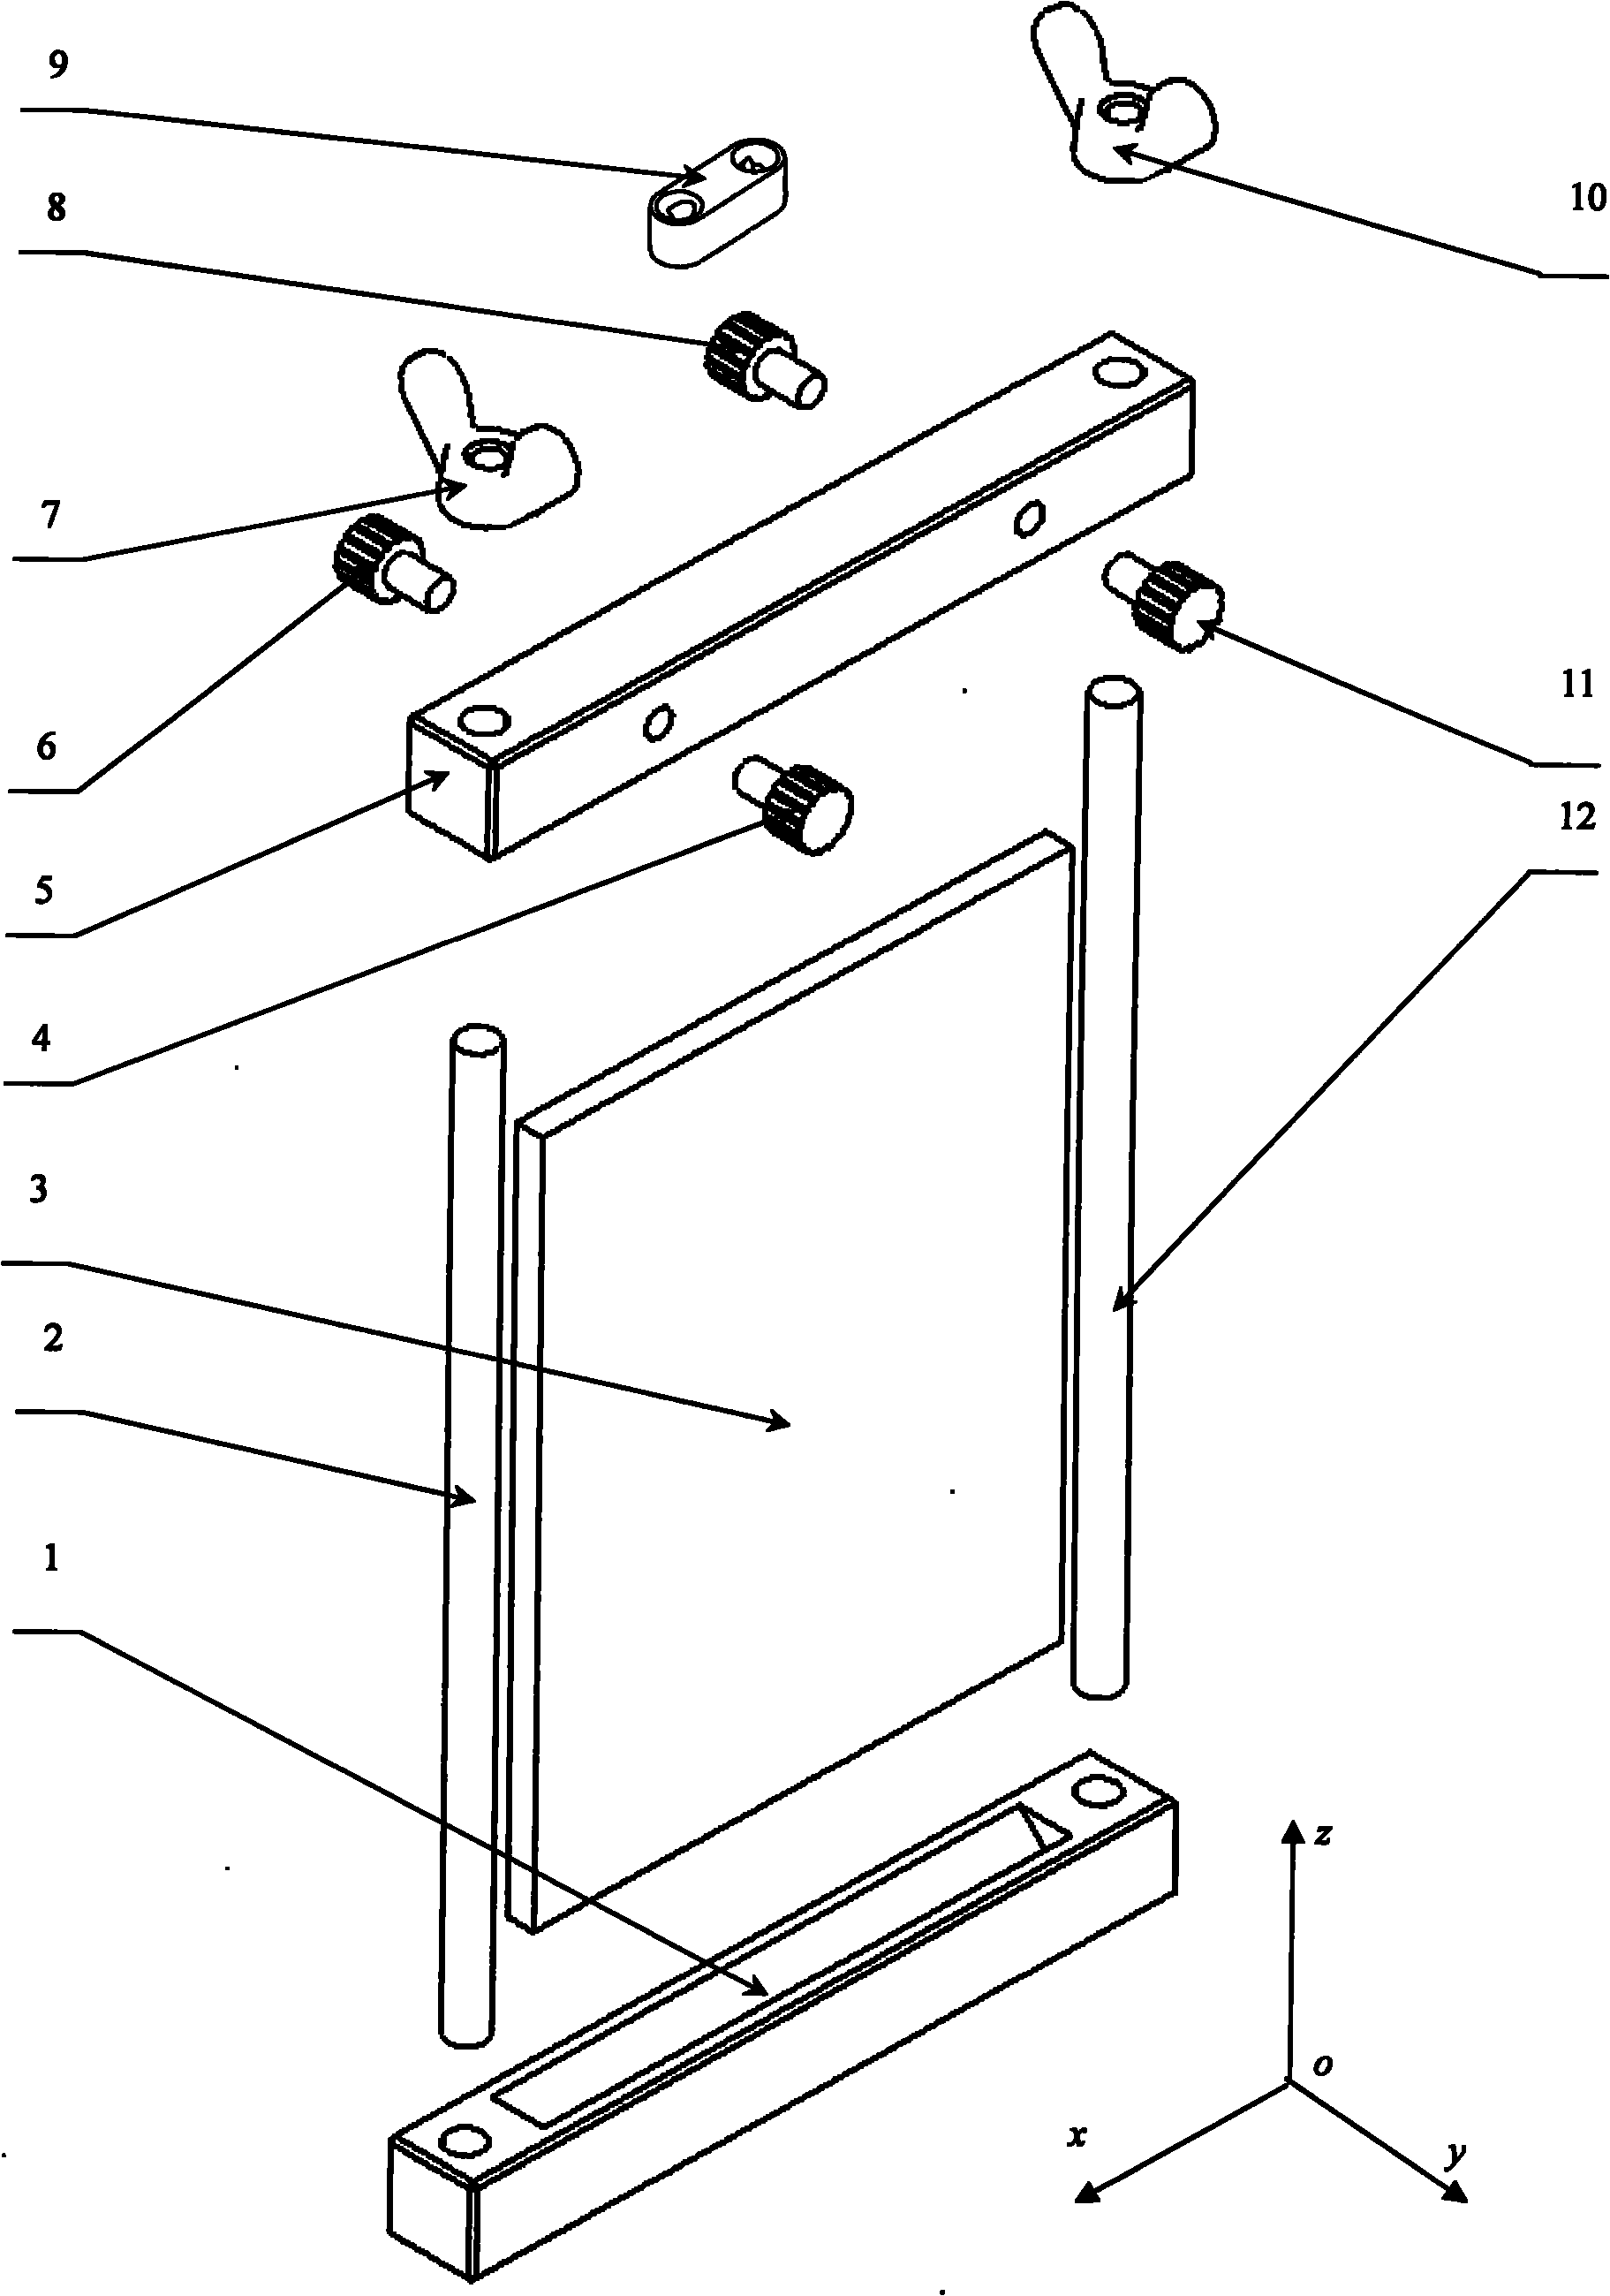 Plane mirror positioning device capable of adjusting position